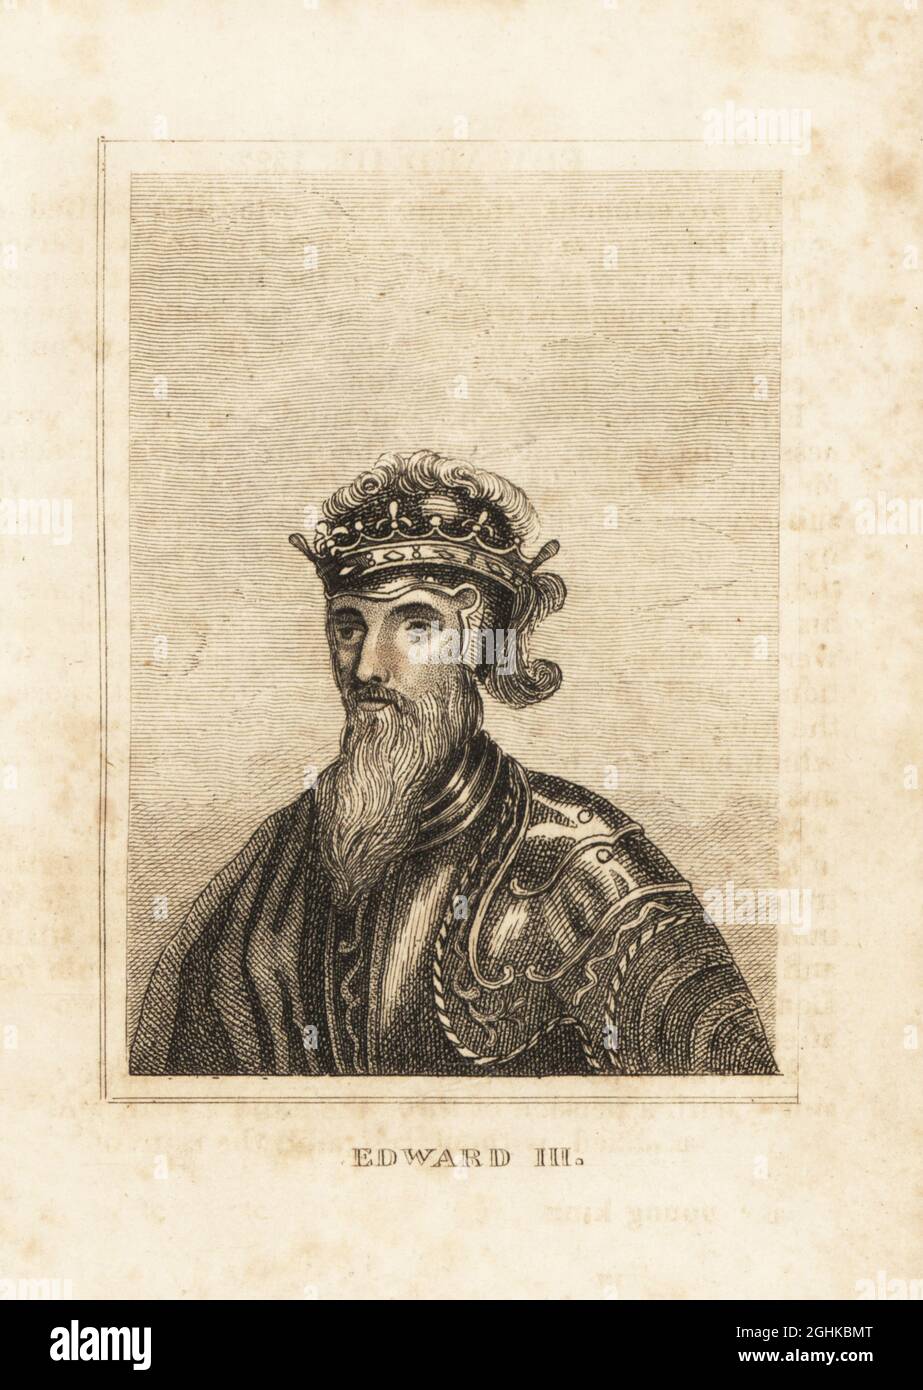 Portrait of King Edward III of England, 1312-1377, in crown, helmet, suit of plate armour and cloak. Copperplate engraving from M. A. Jones’ History of England from Julius Caesar to George IV, G. Virtue, 26 Ivy Lane, London, 1836. Stock Photo